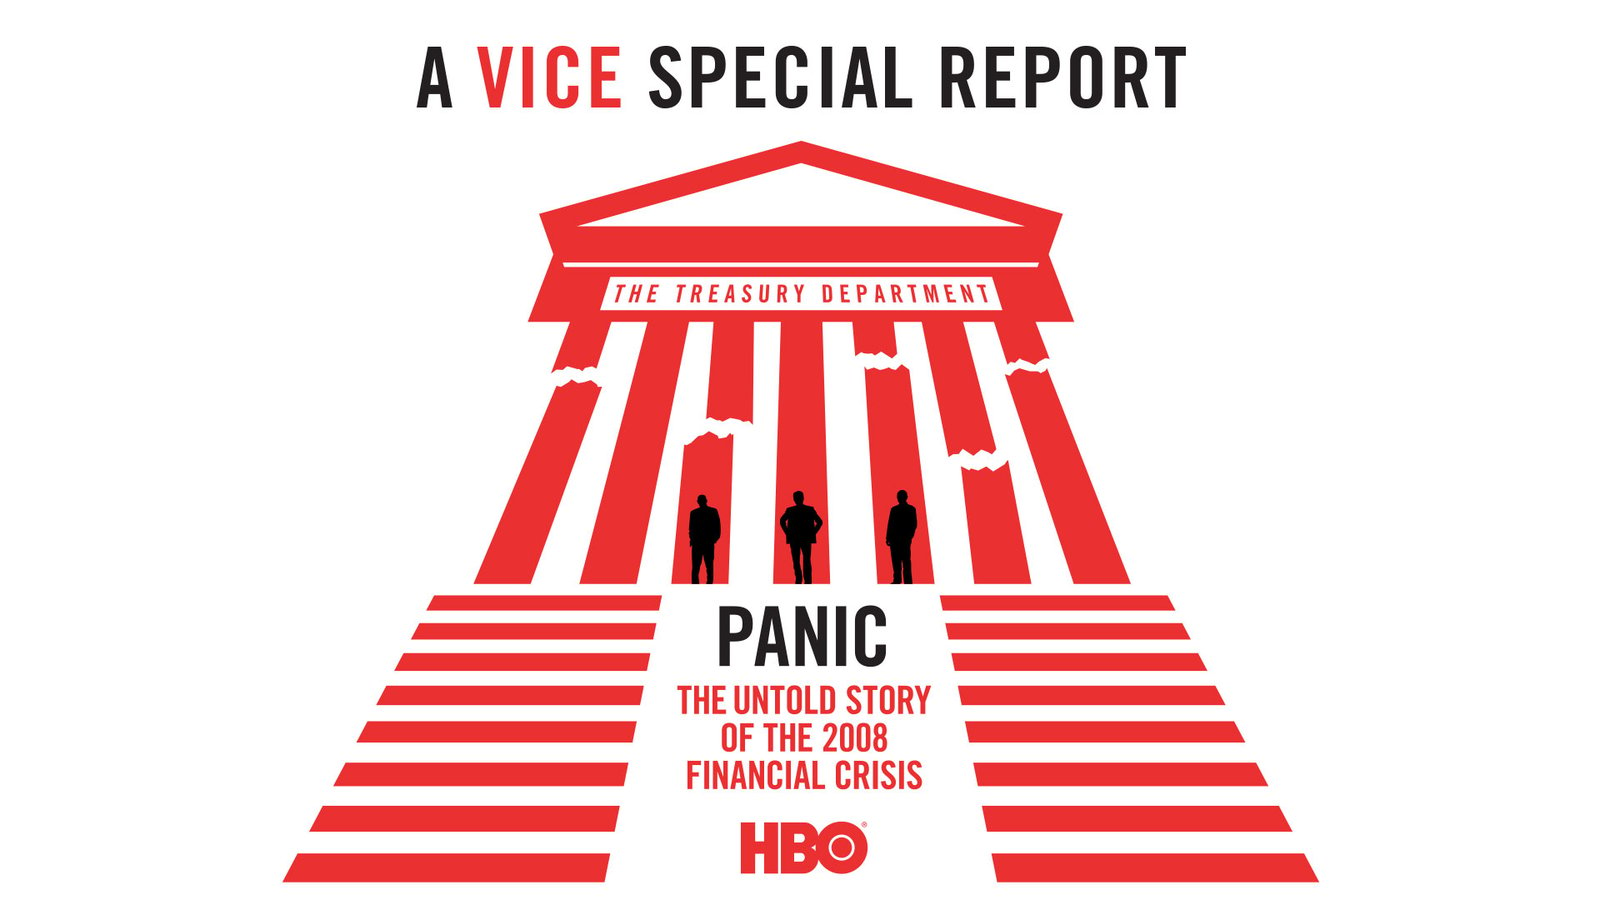 Panic: The Untold Story of the 2008 Financial Crisis - A Vice Special Report